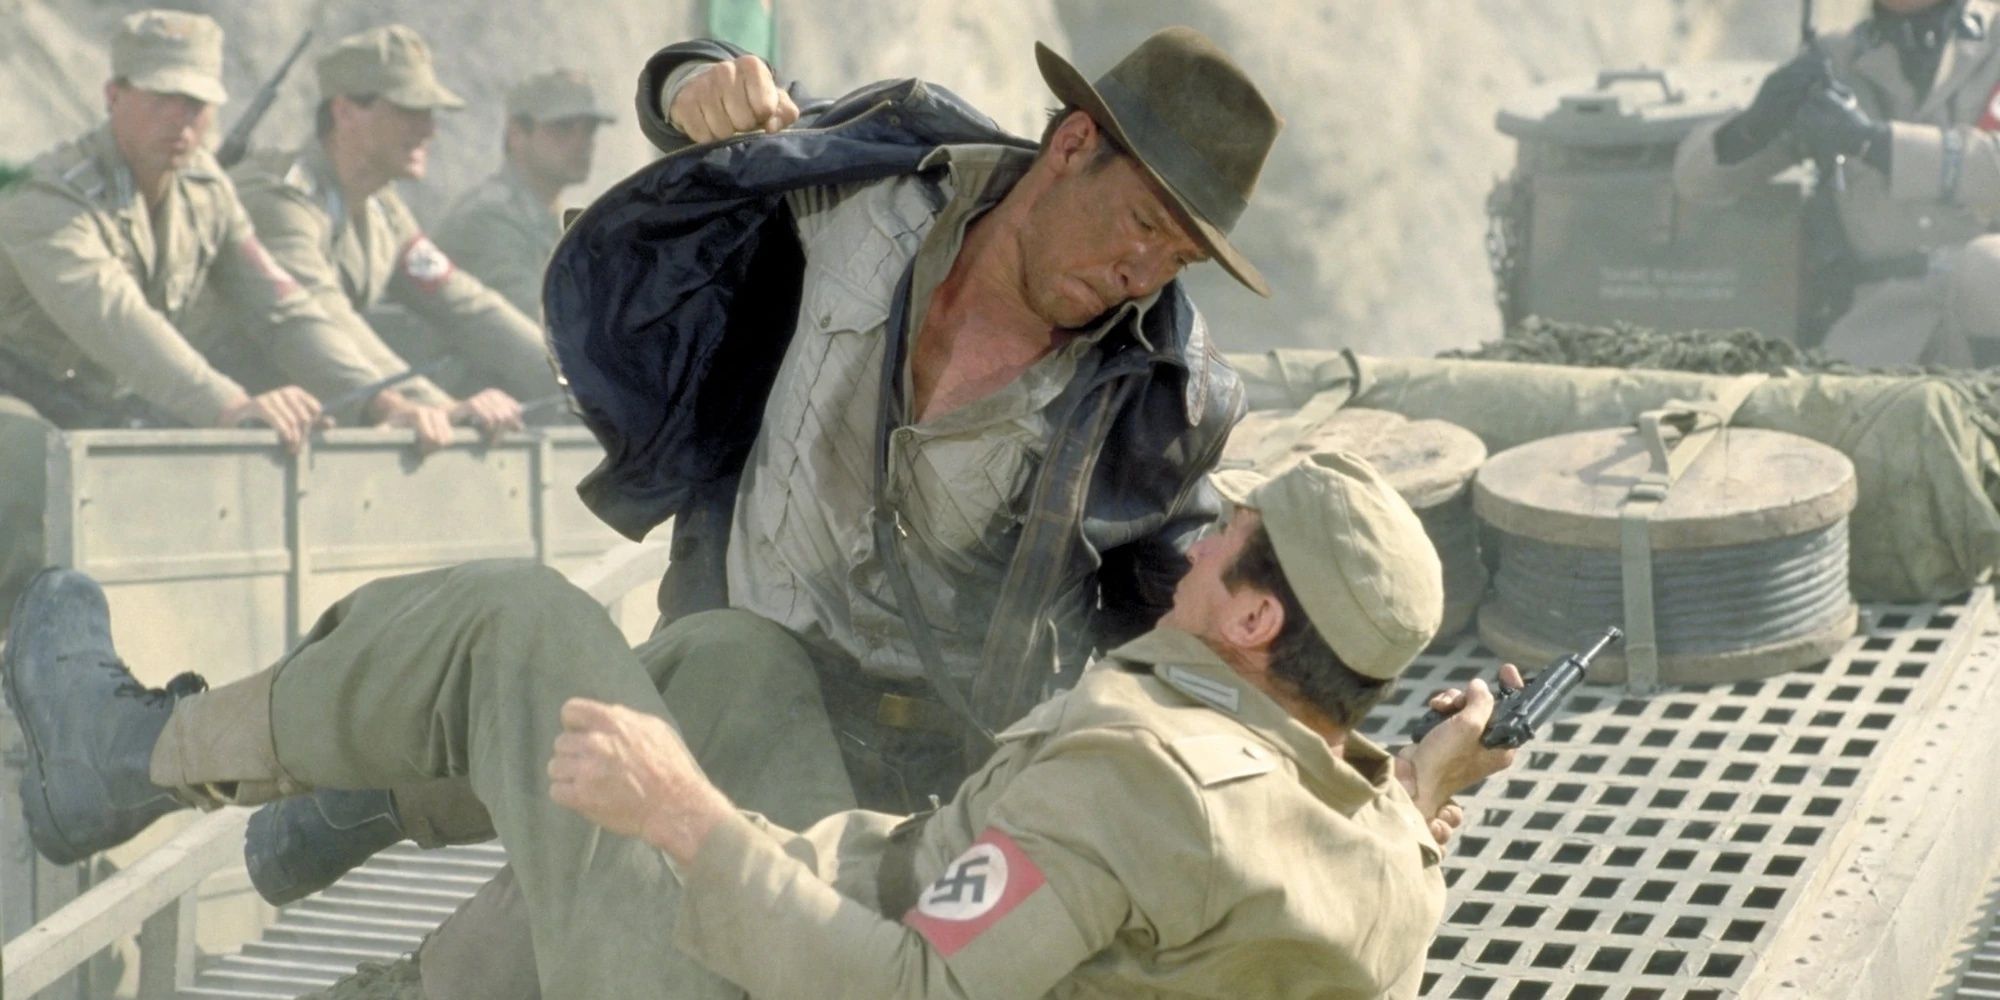 Indiana Jones punches a Nazi soldier on a tank in Indiana Jones and the Last Crusade